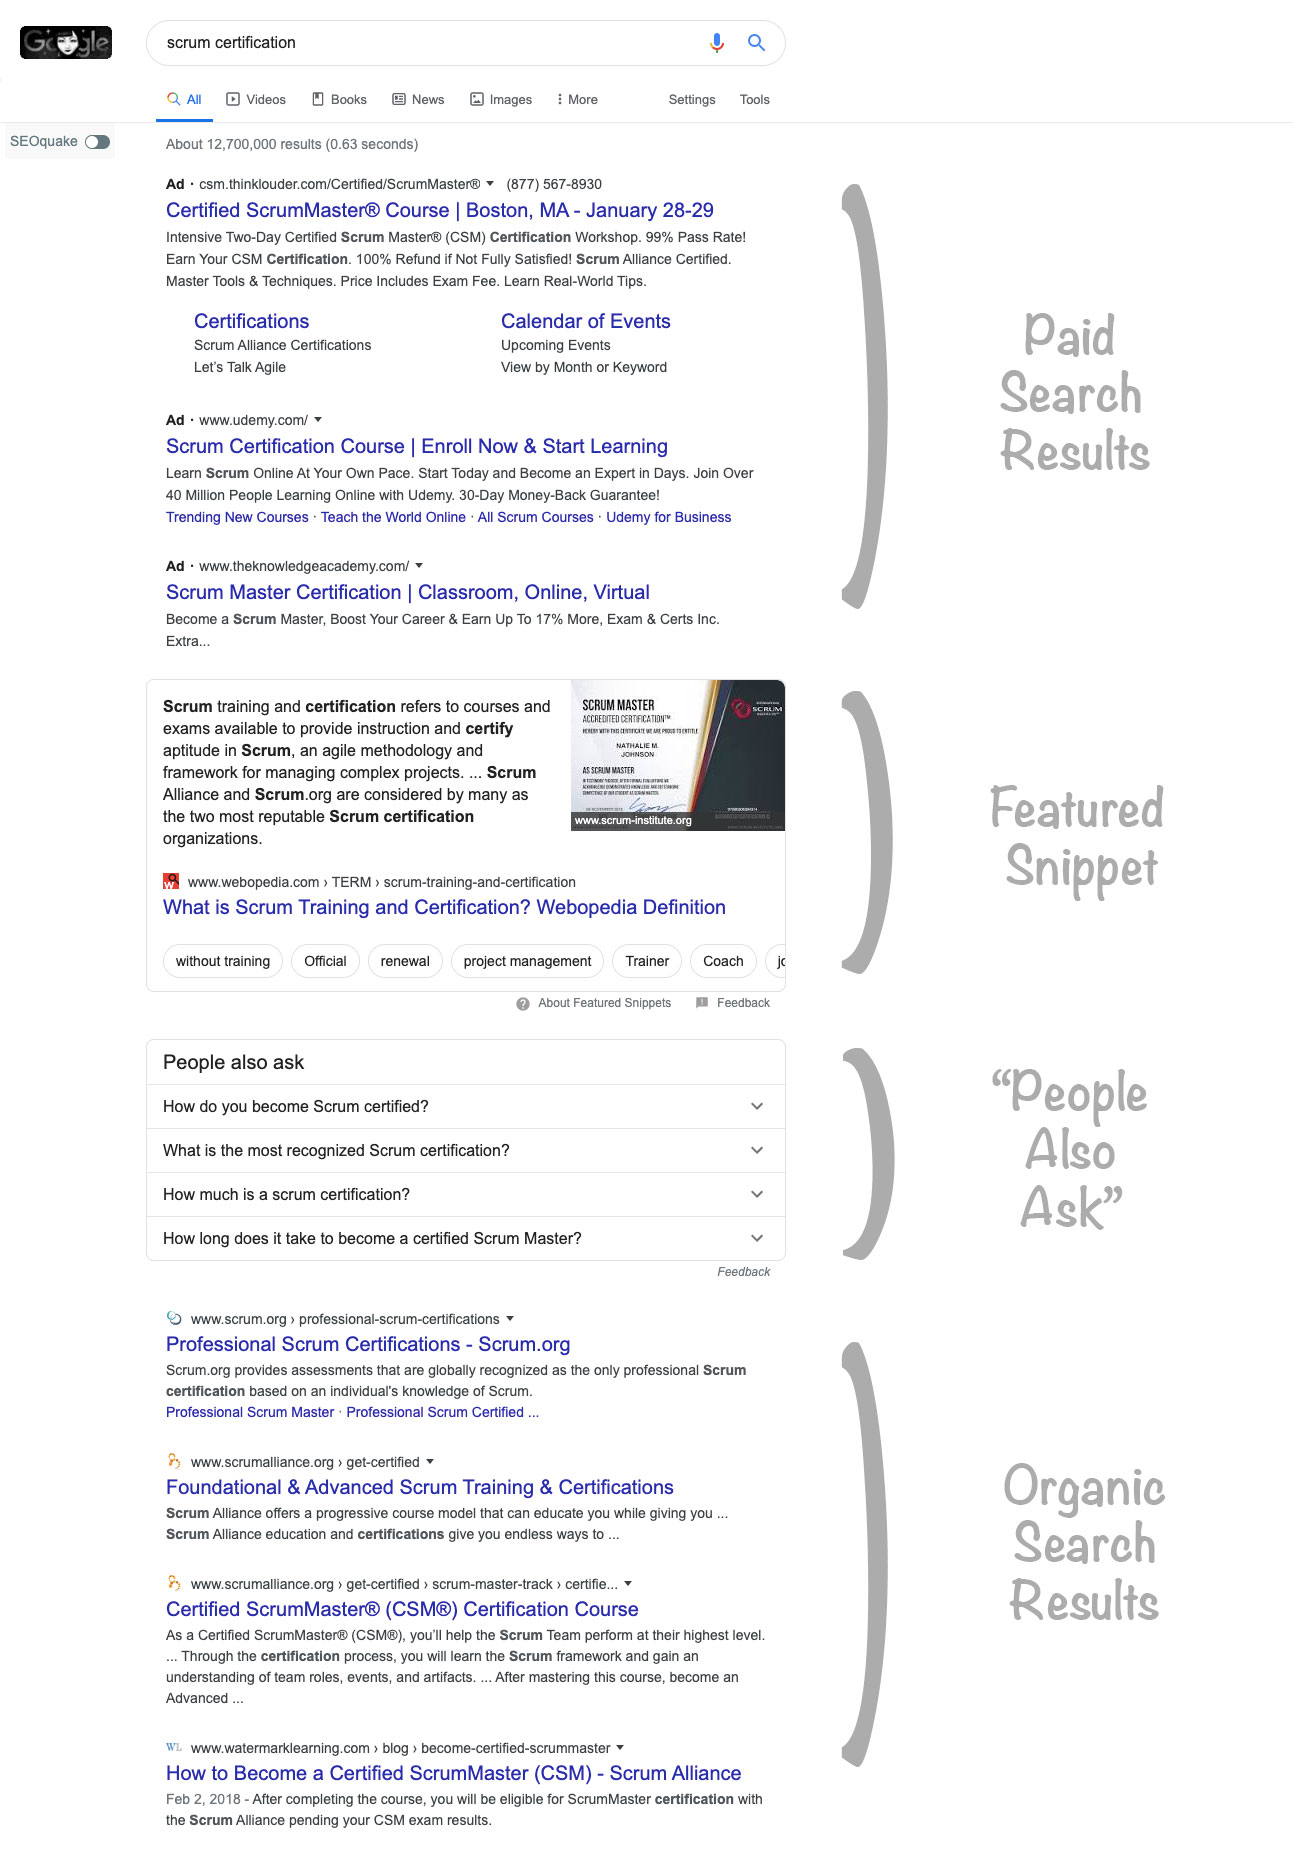 An annotated Google search results page.